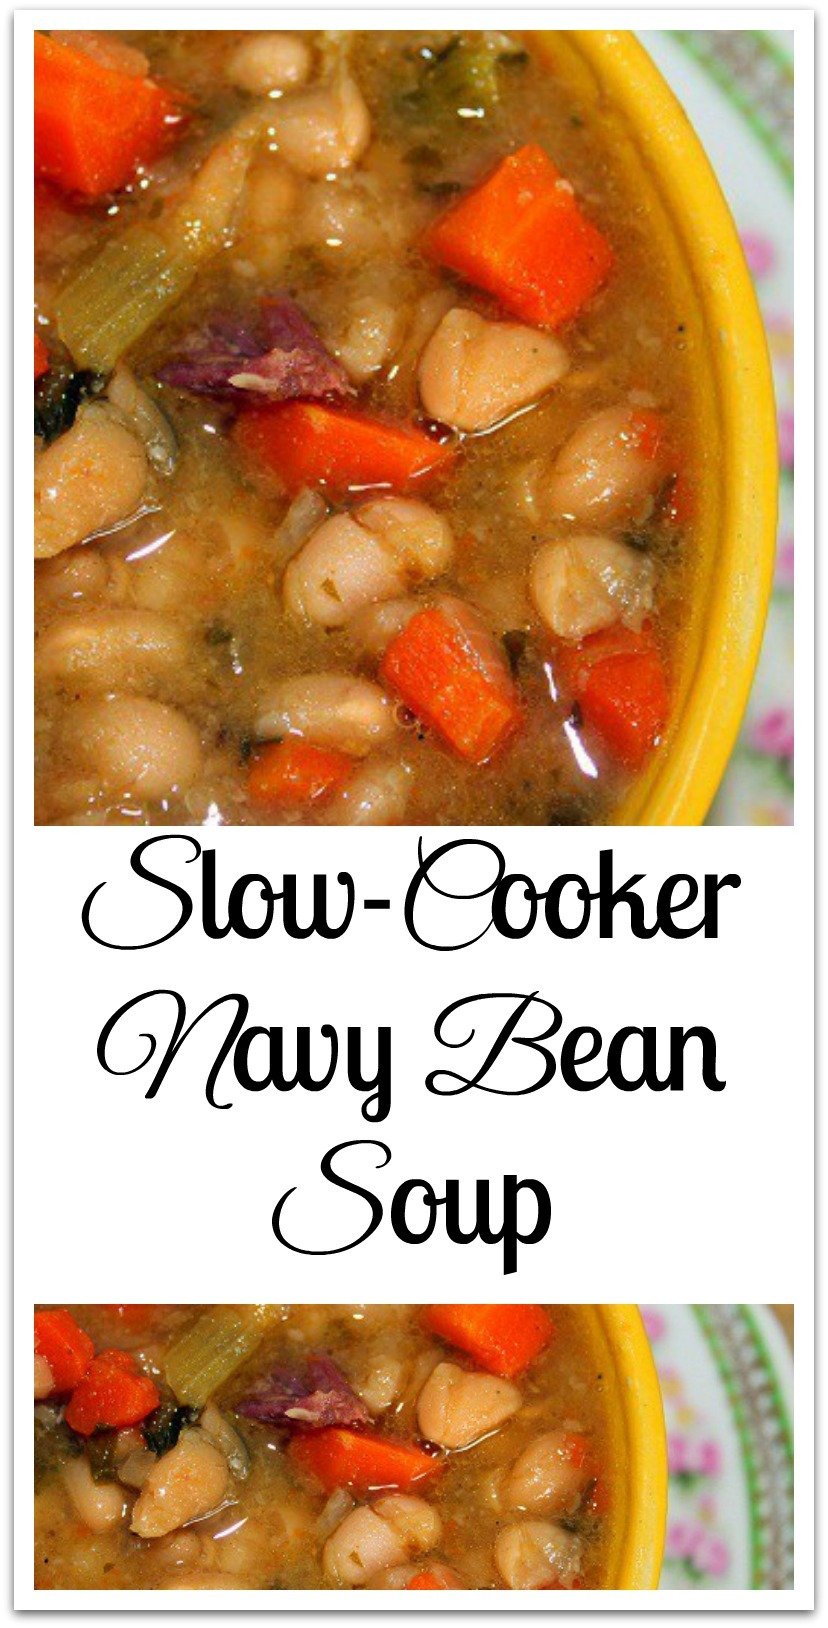 Navy bean soup is easy, nutritious, delicious, hearty and debit card friendly.  That's a winner in anybody's book. #SlowCooker #NavyBean #SouthernSoup